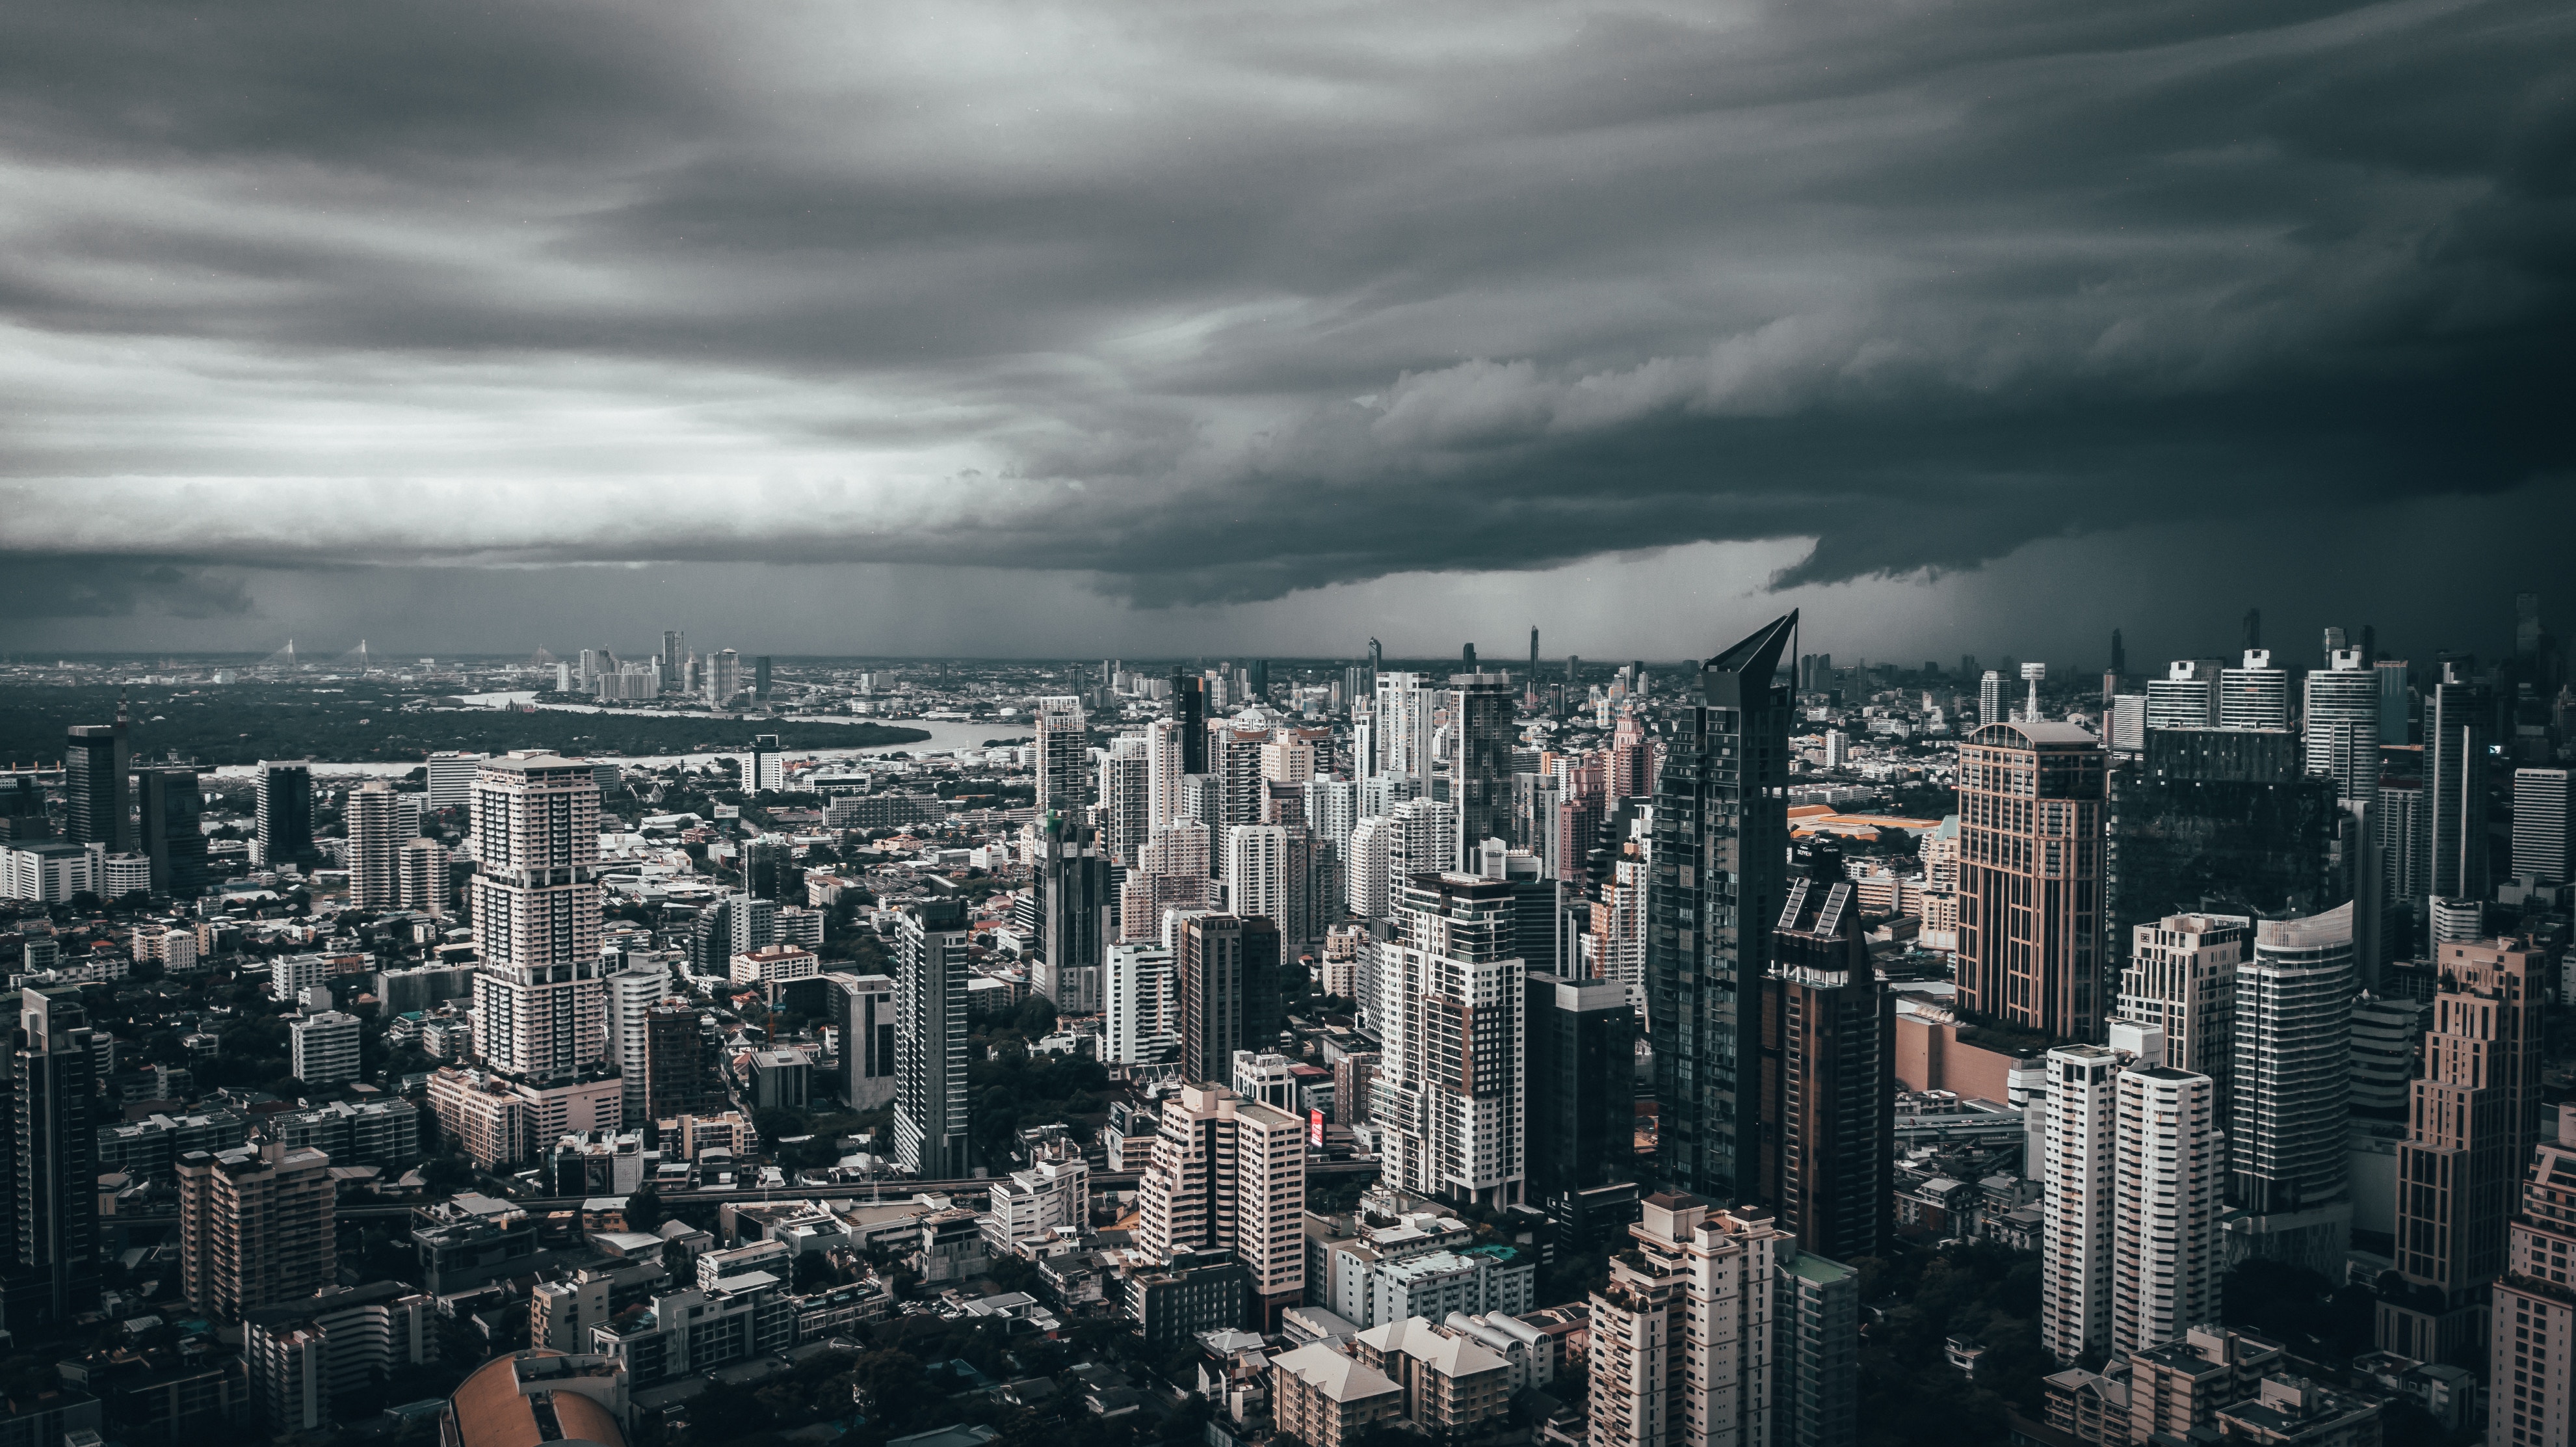 Full HD mainly cloudy, cities, clouds, city, view from above, skyscrapers, overcast